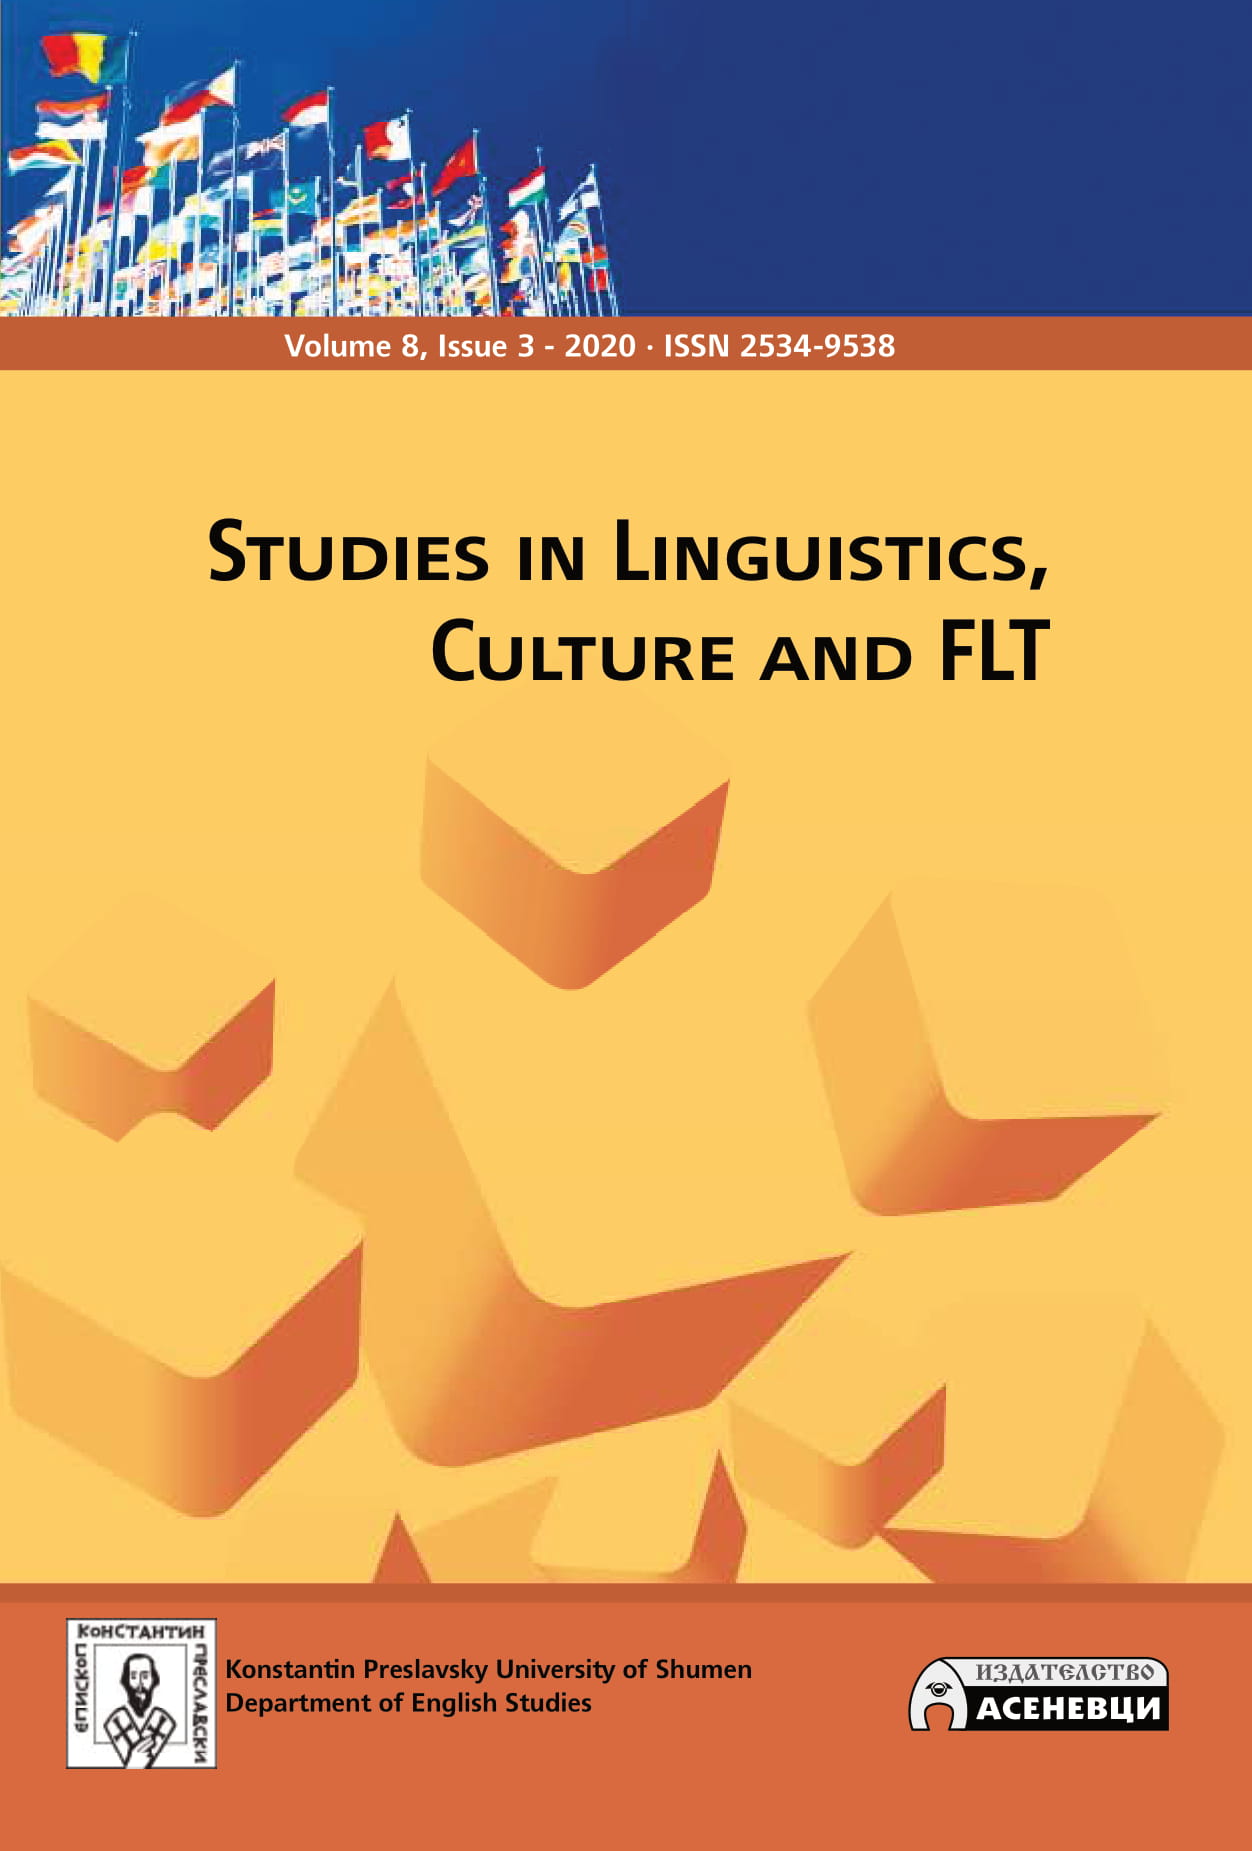 Teaching Language And Culture With The Consideration Of Ethno-Psychological Aspects Of Communication